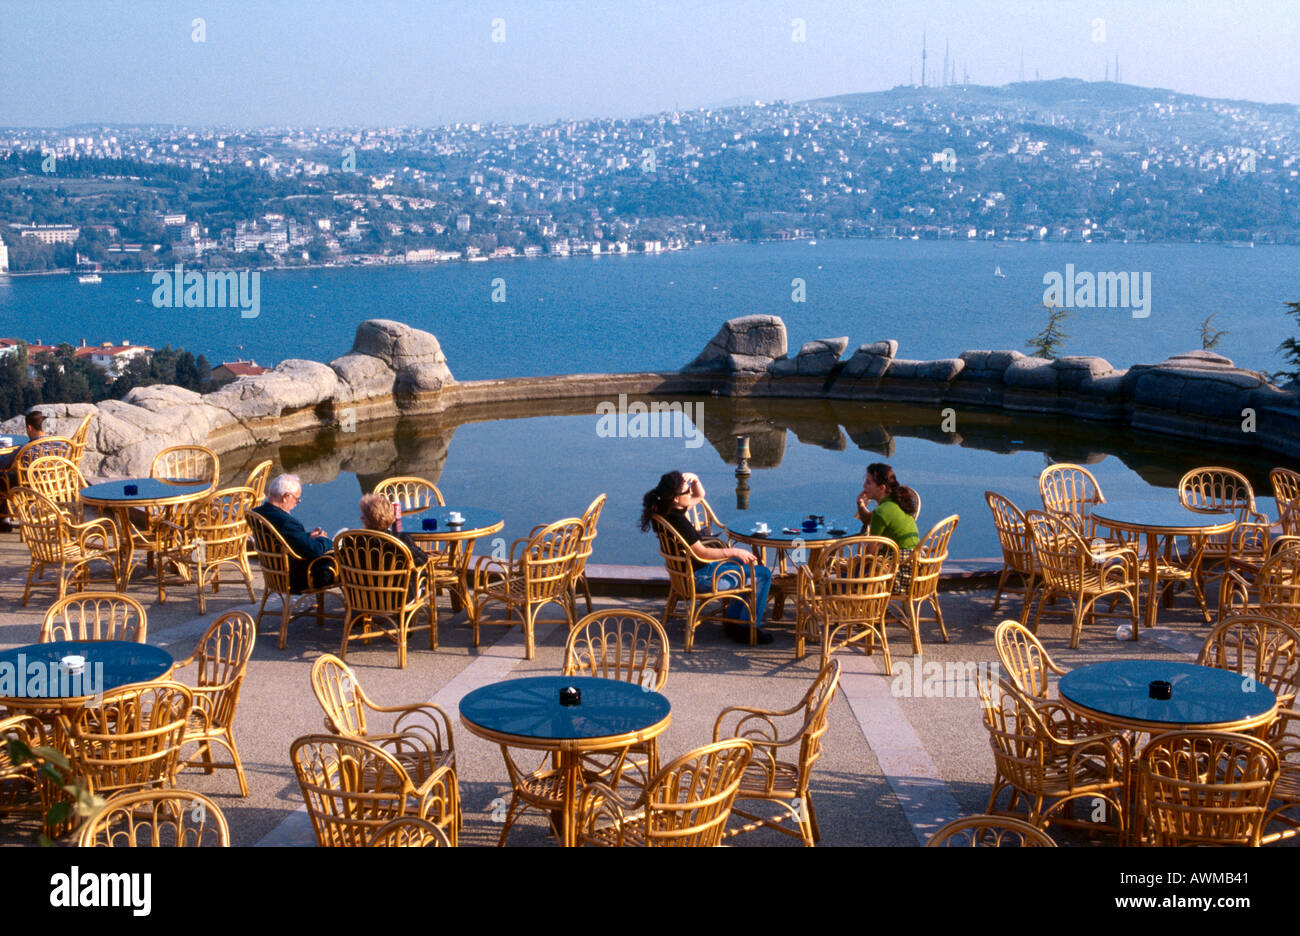 Tourists relaxing on a poolside, Ulus Park, Istanbul, Turkey Stock Photo